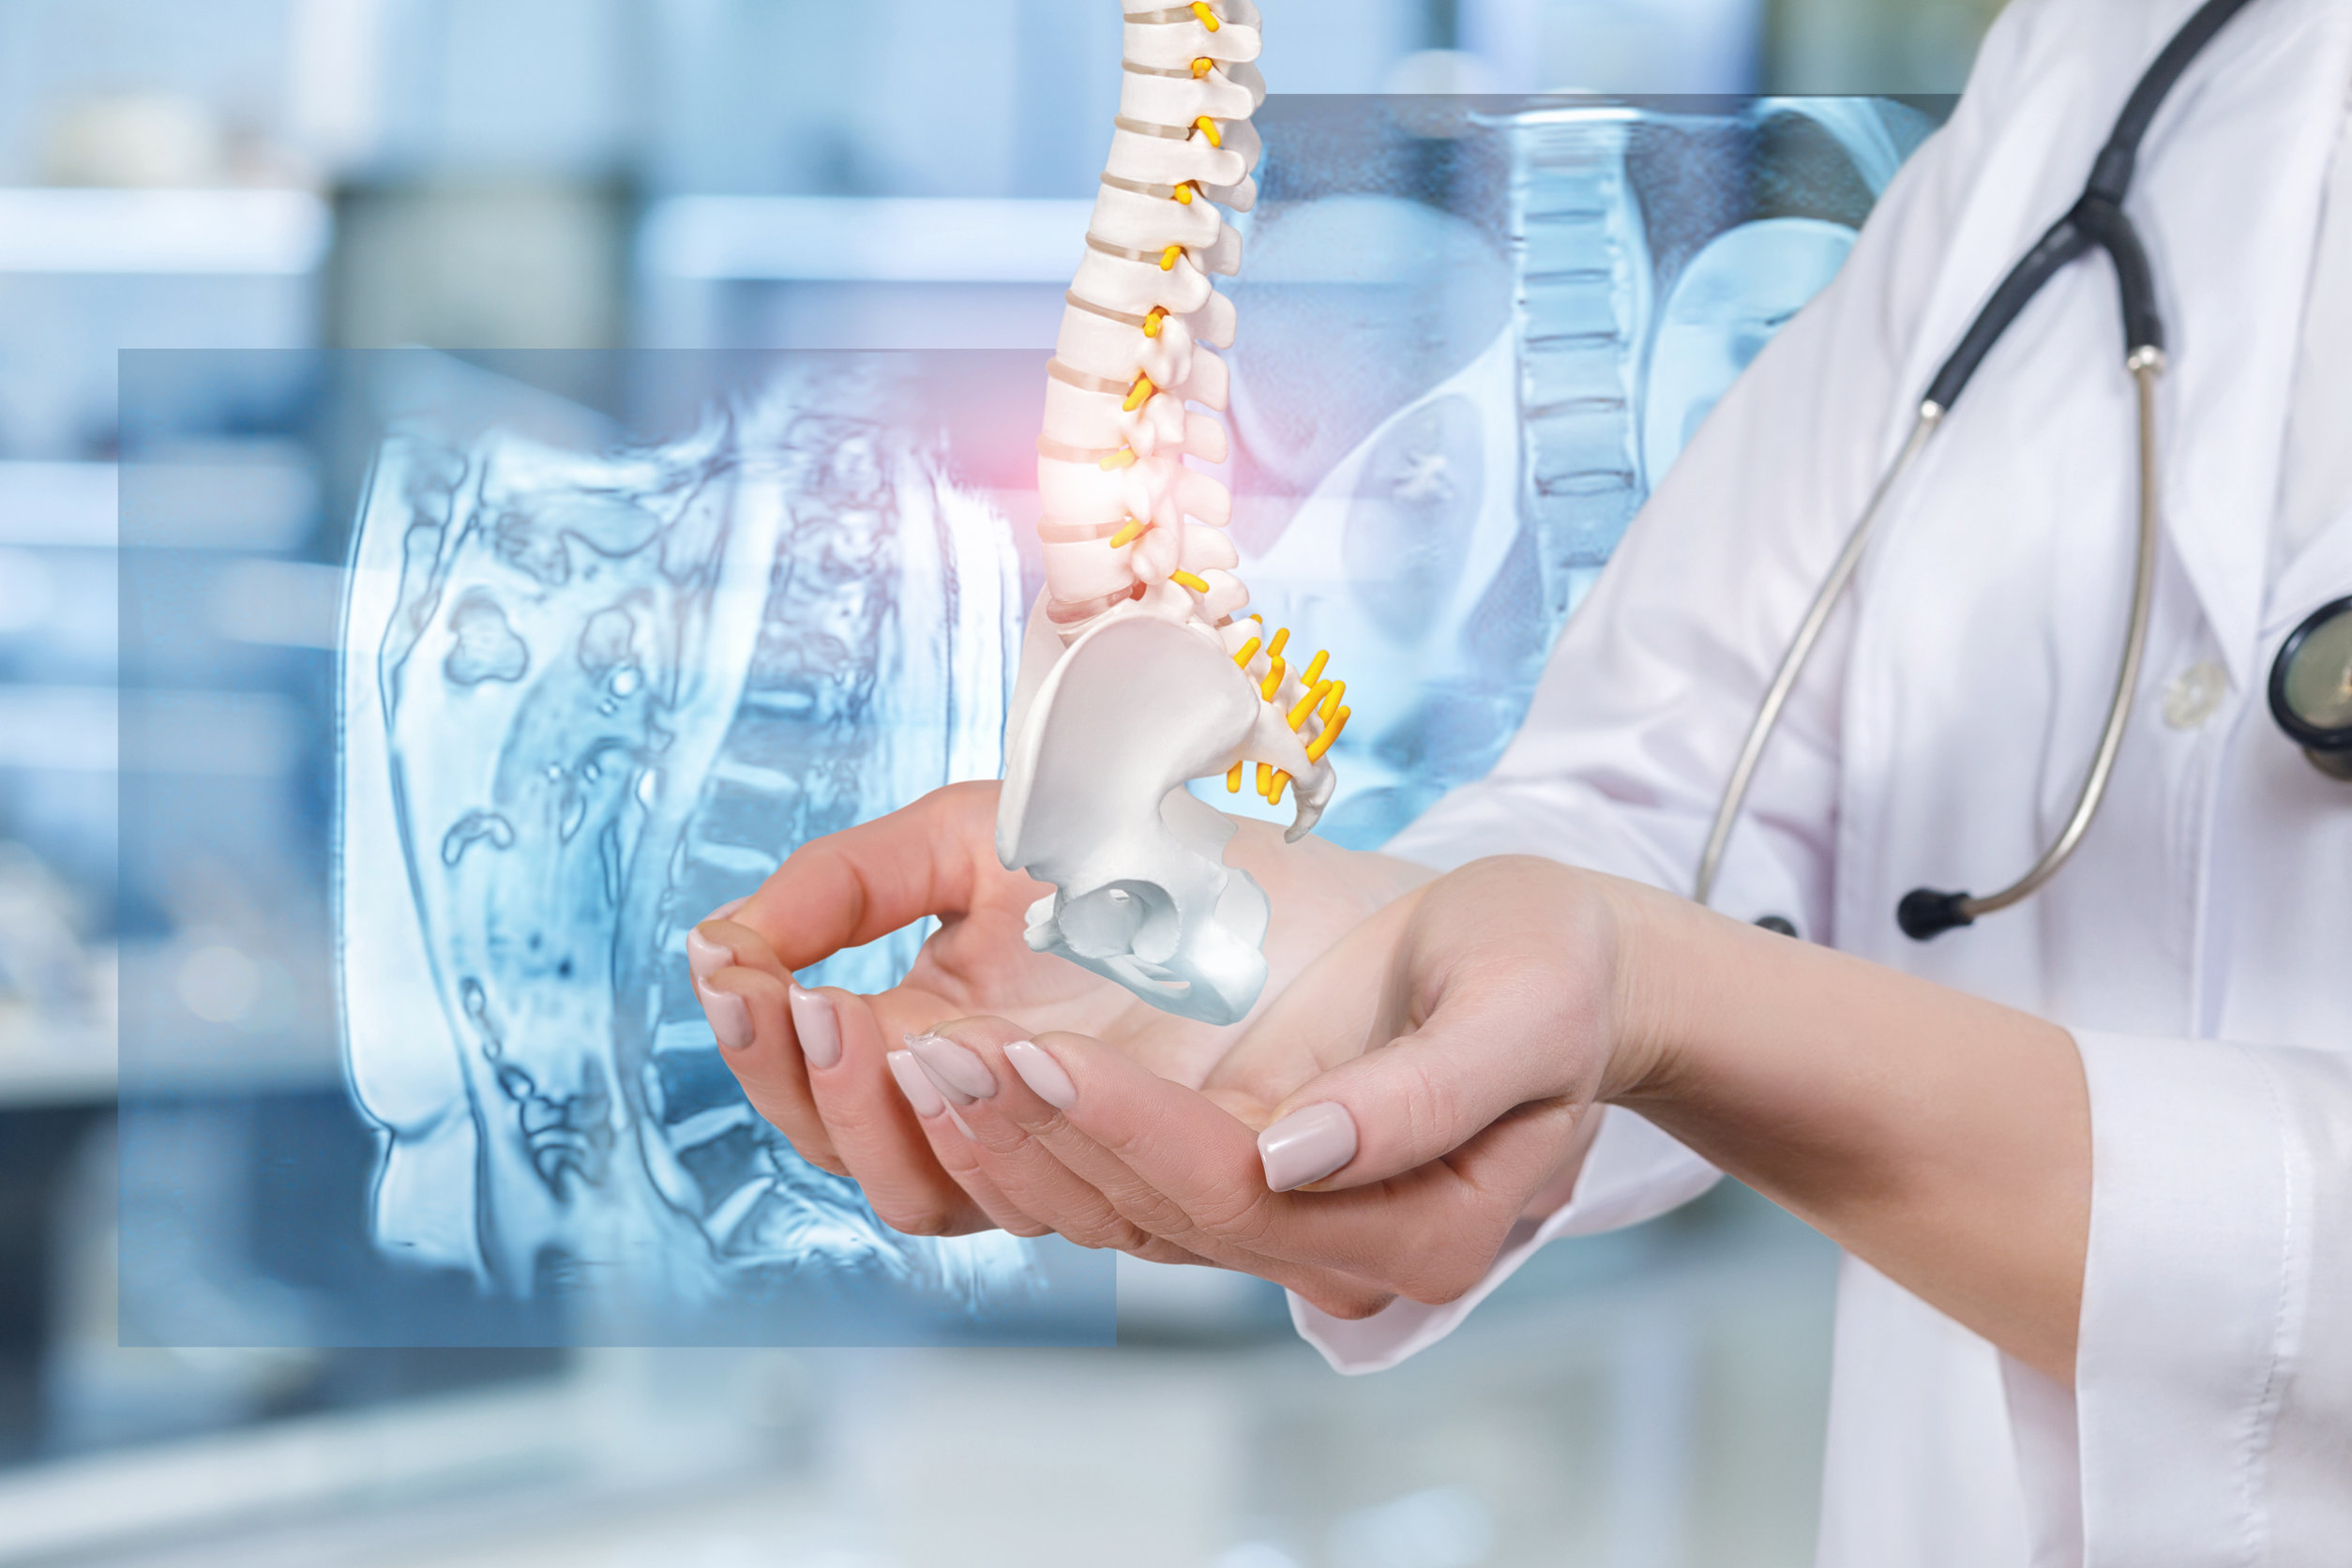 What You Need to Know About Spinal Infections